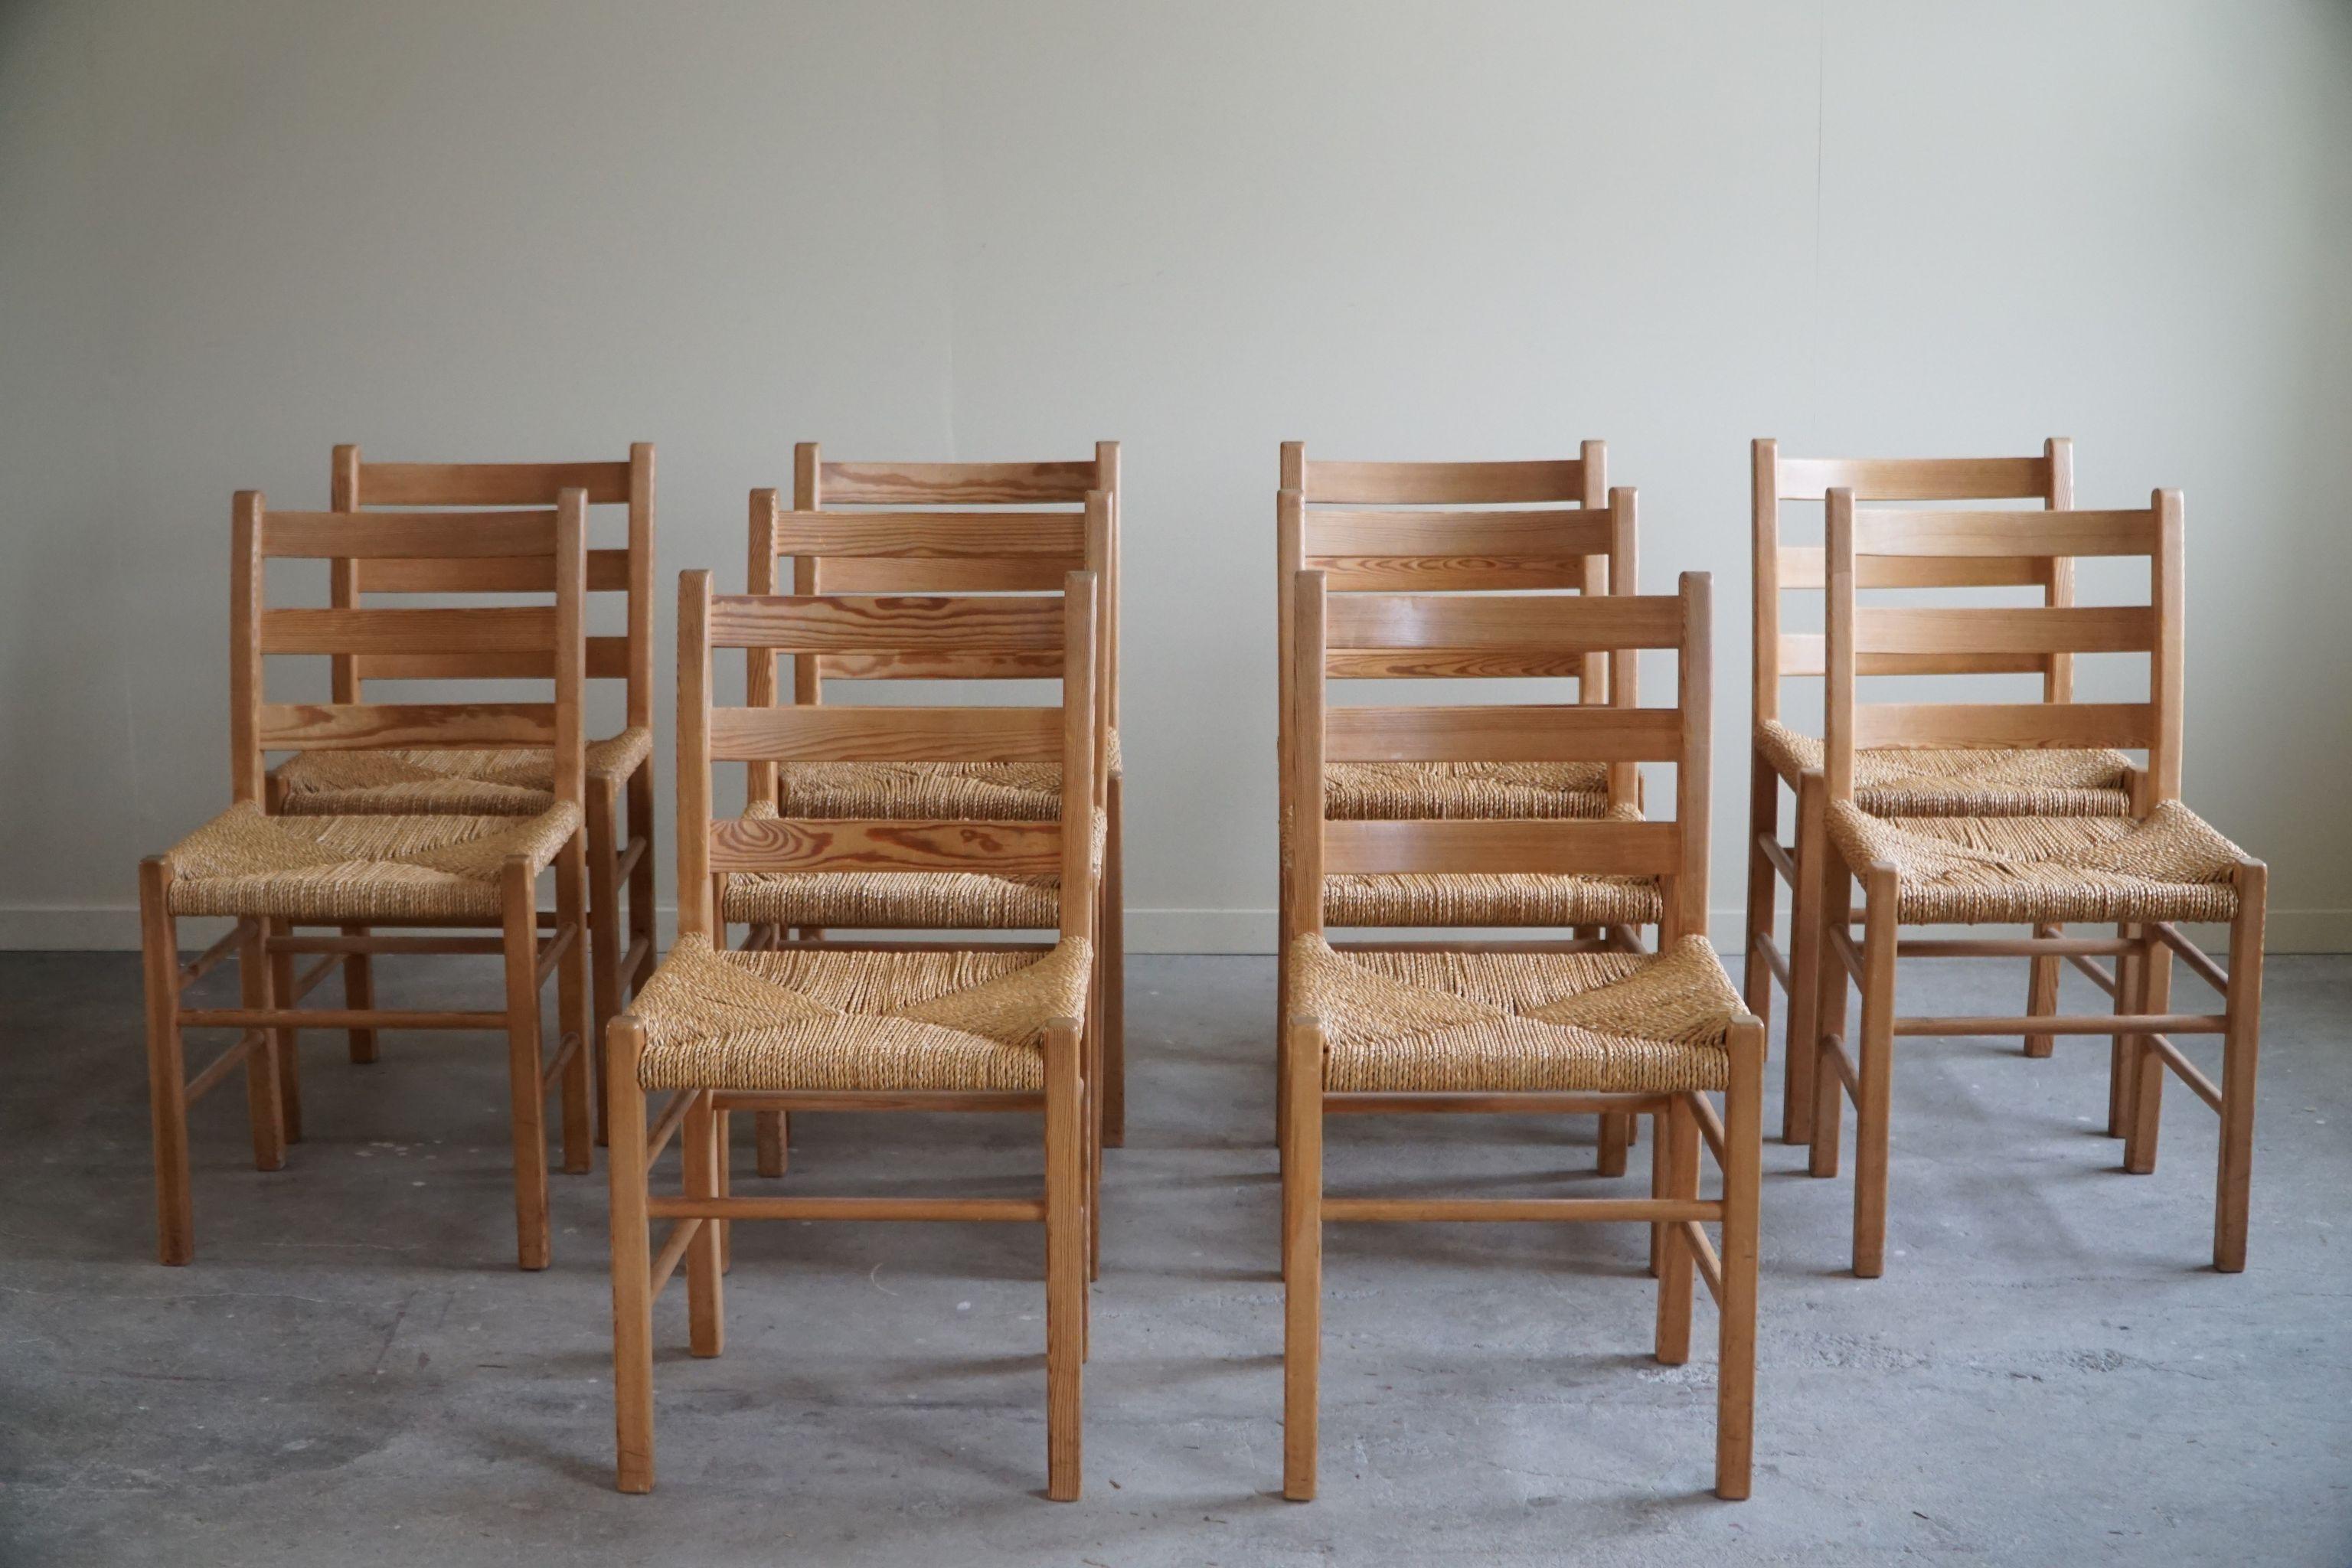 Set of 10 Dining Chairs in Pine & Seagrass Seats, Danish Mid Century, 1960s For Sale 8